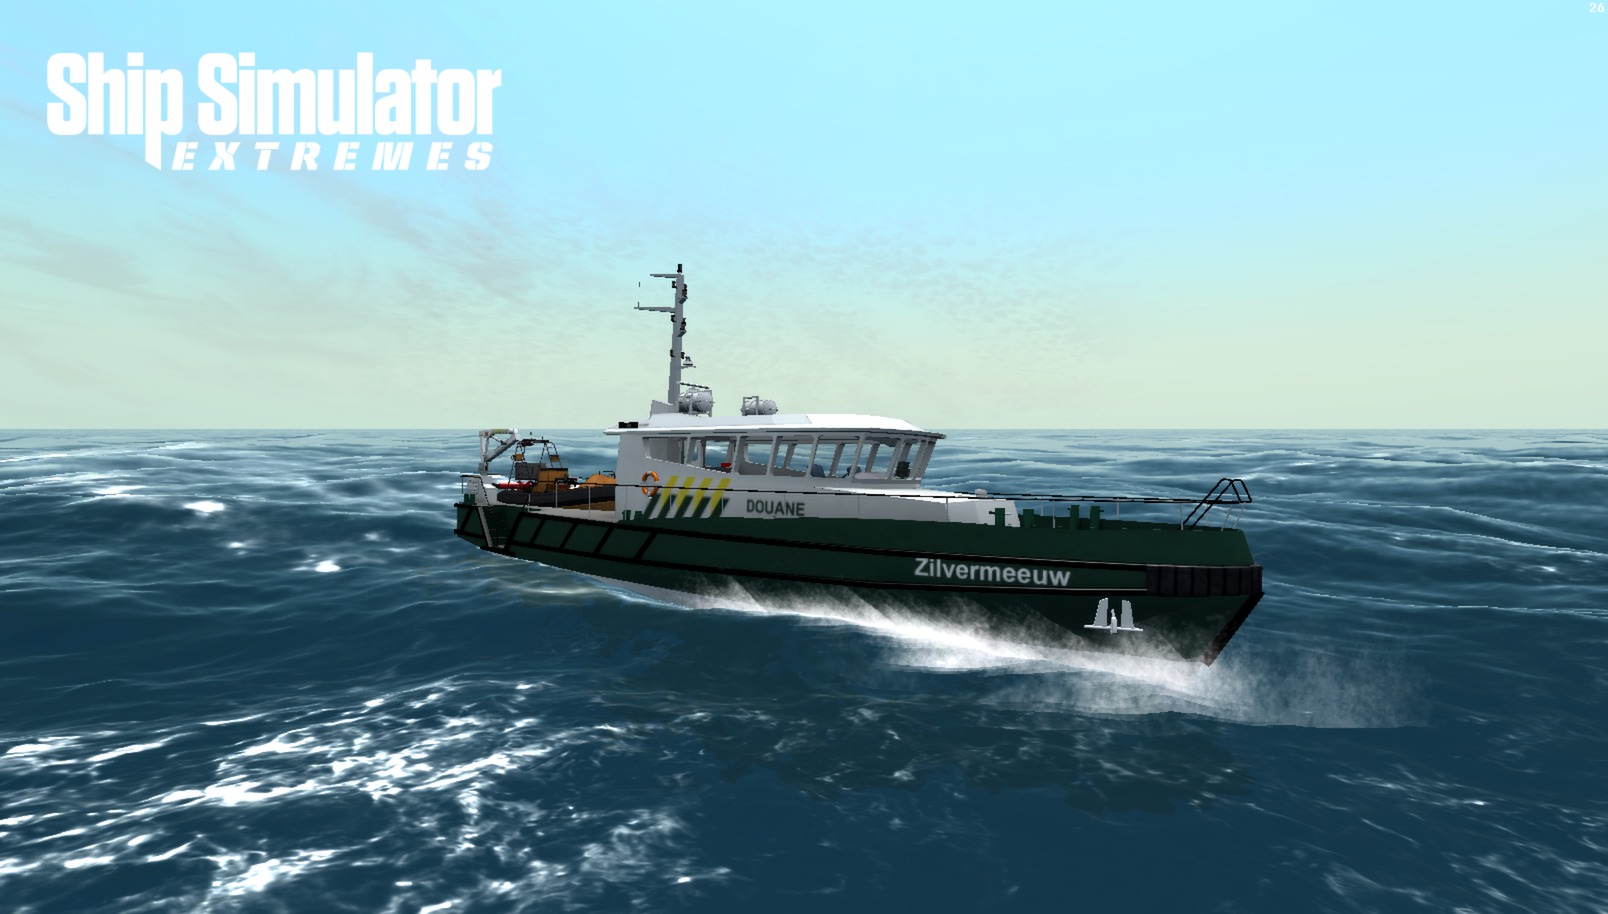 Ship Simulator Extremes On Steam